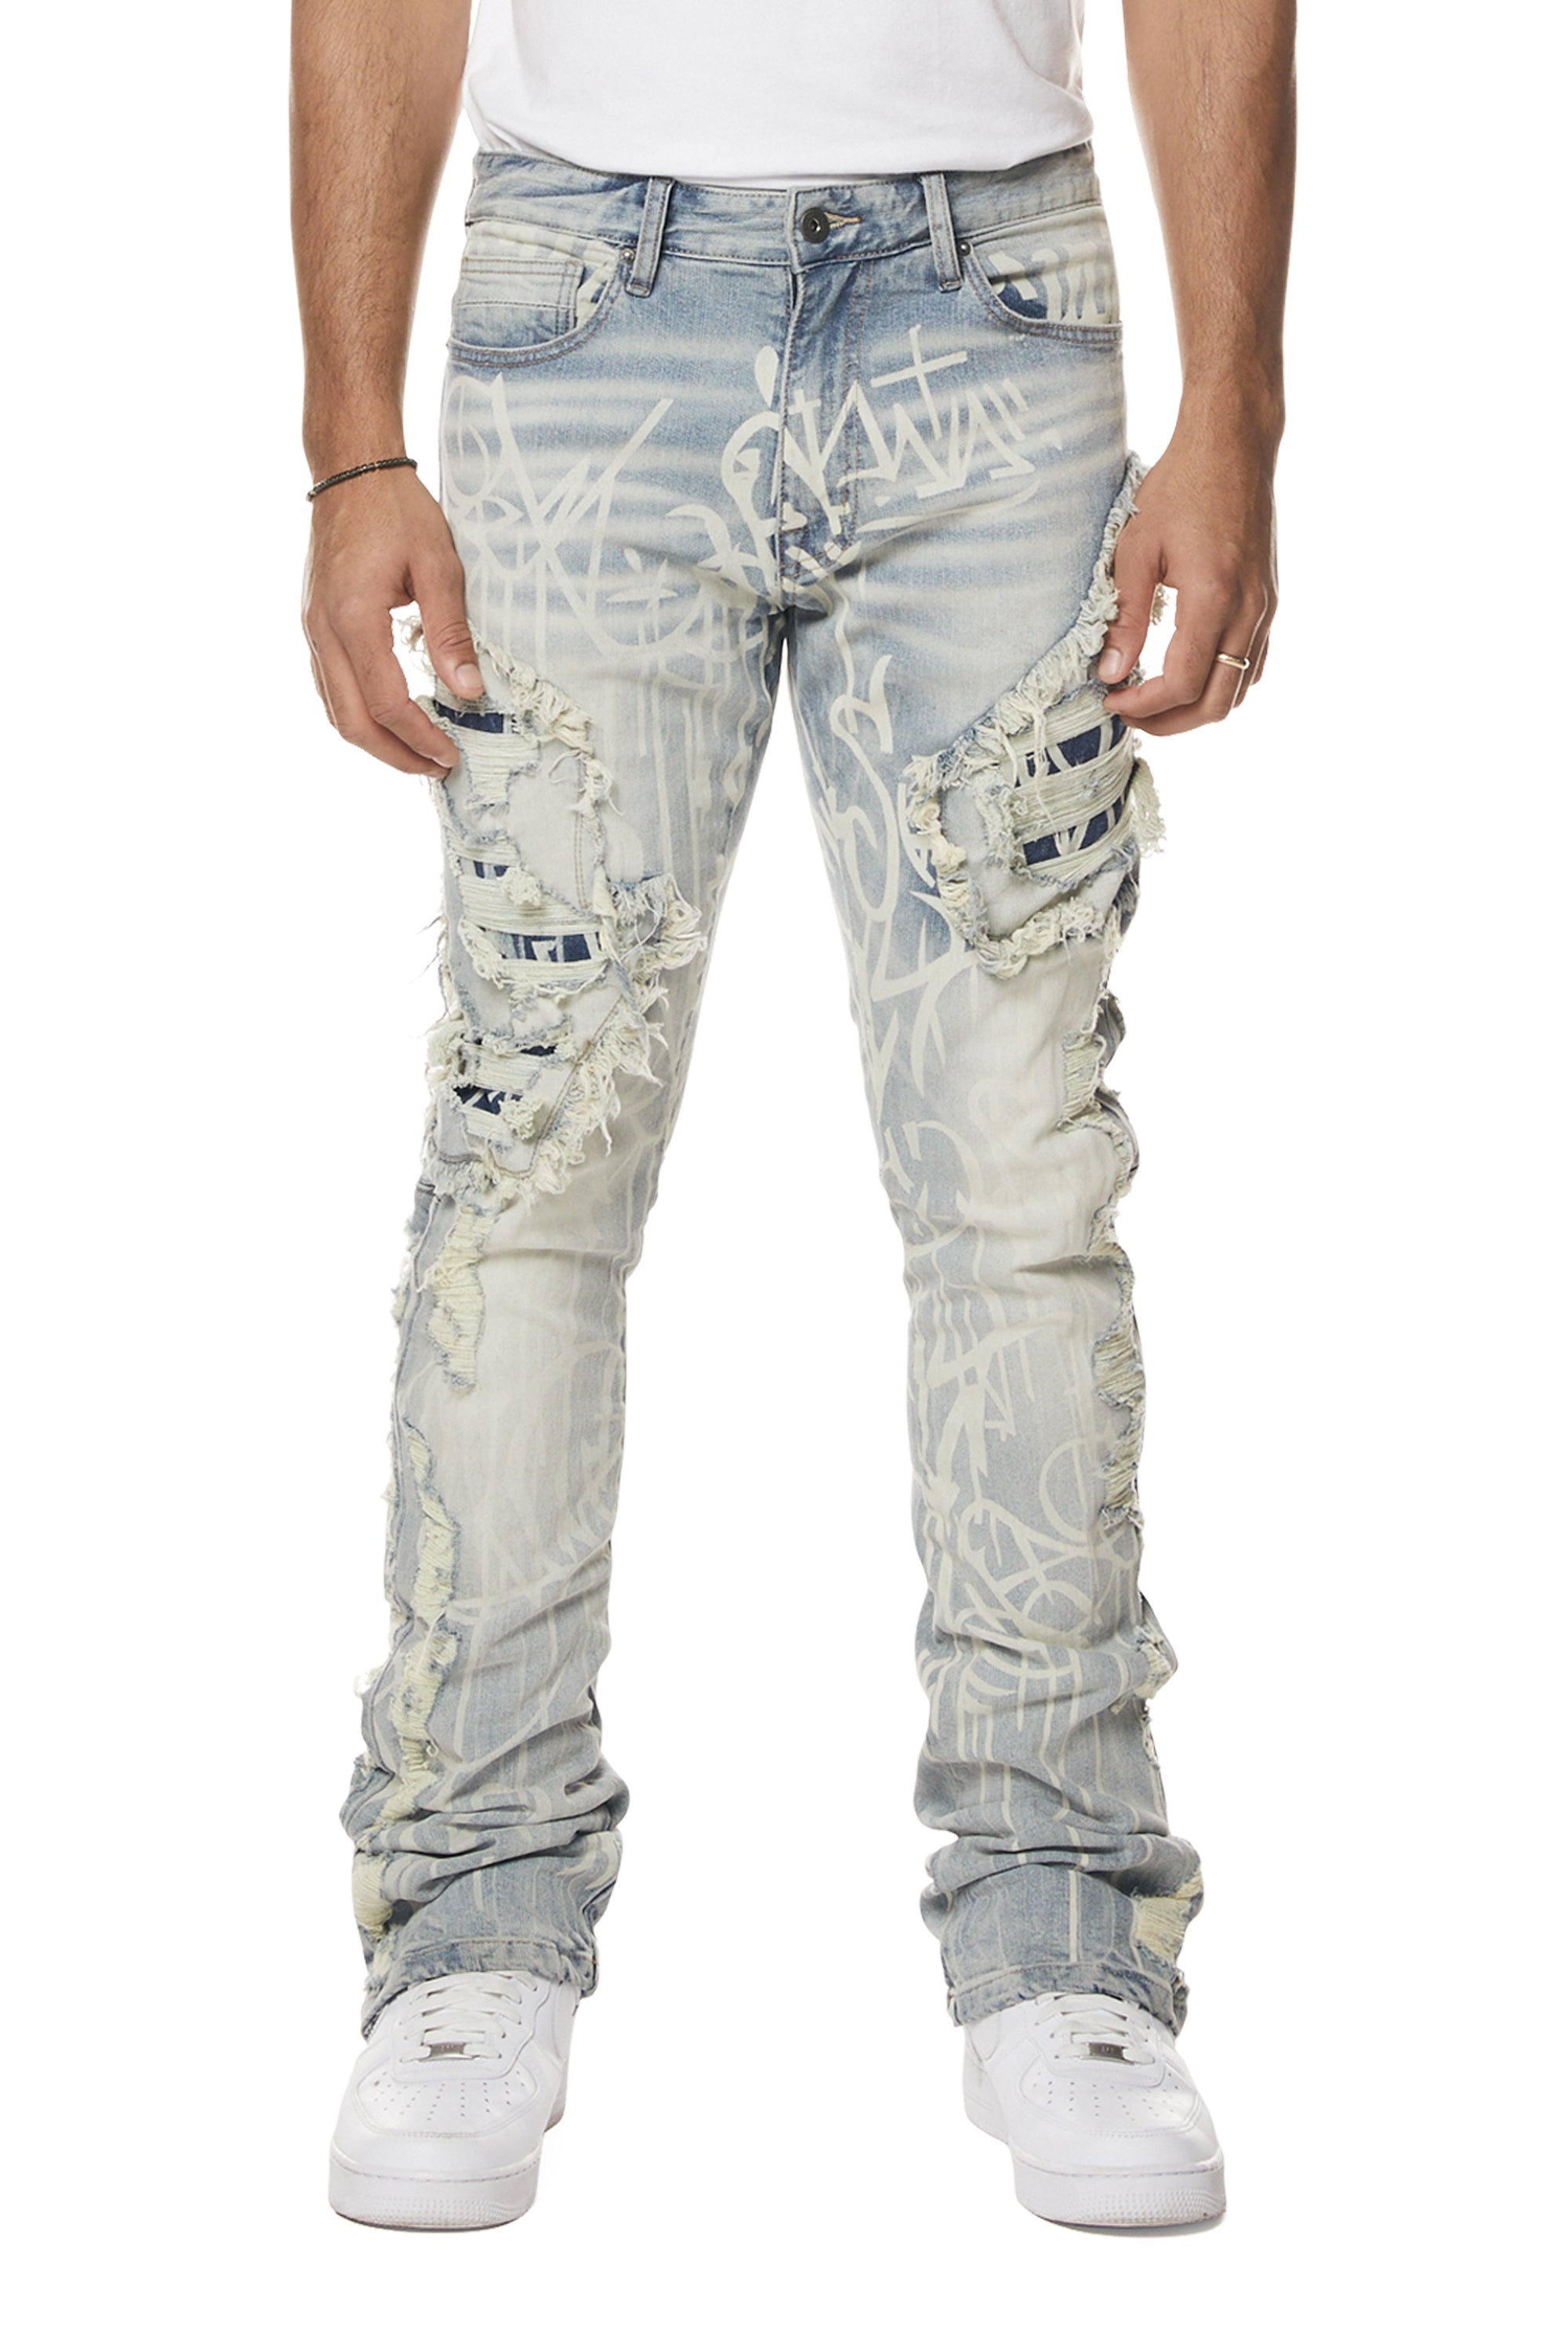 Blue Denim Stacked Jeans Made to Order -  Israel